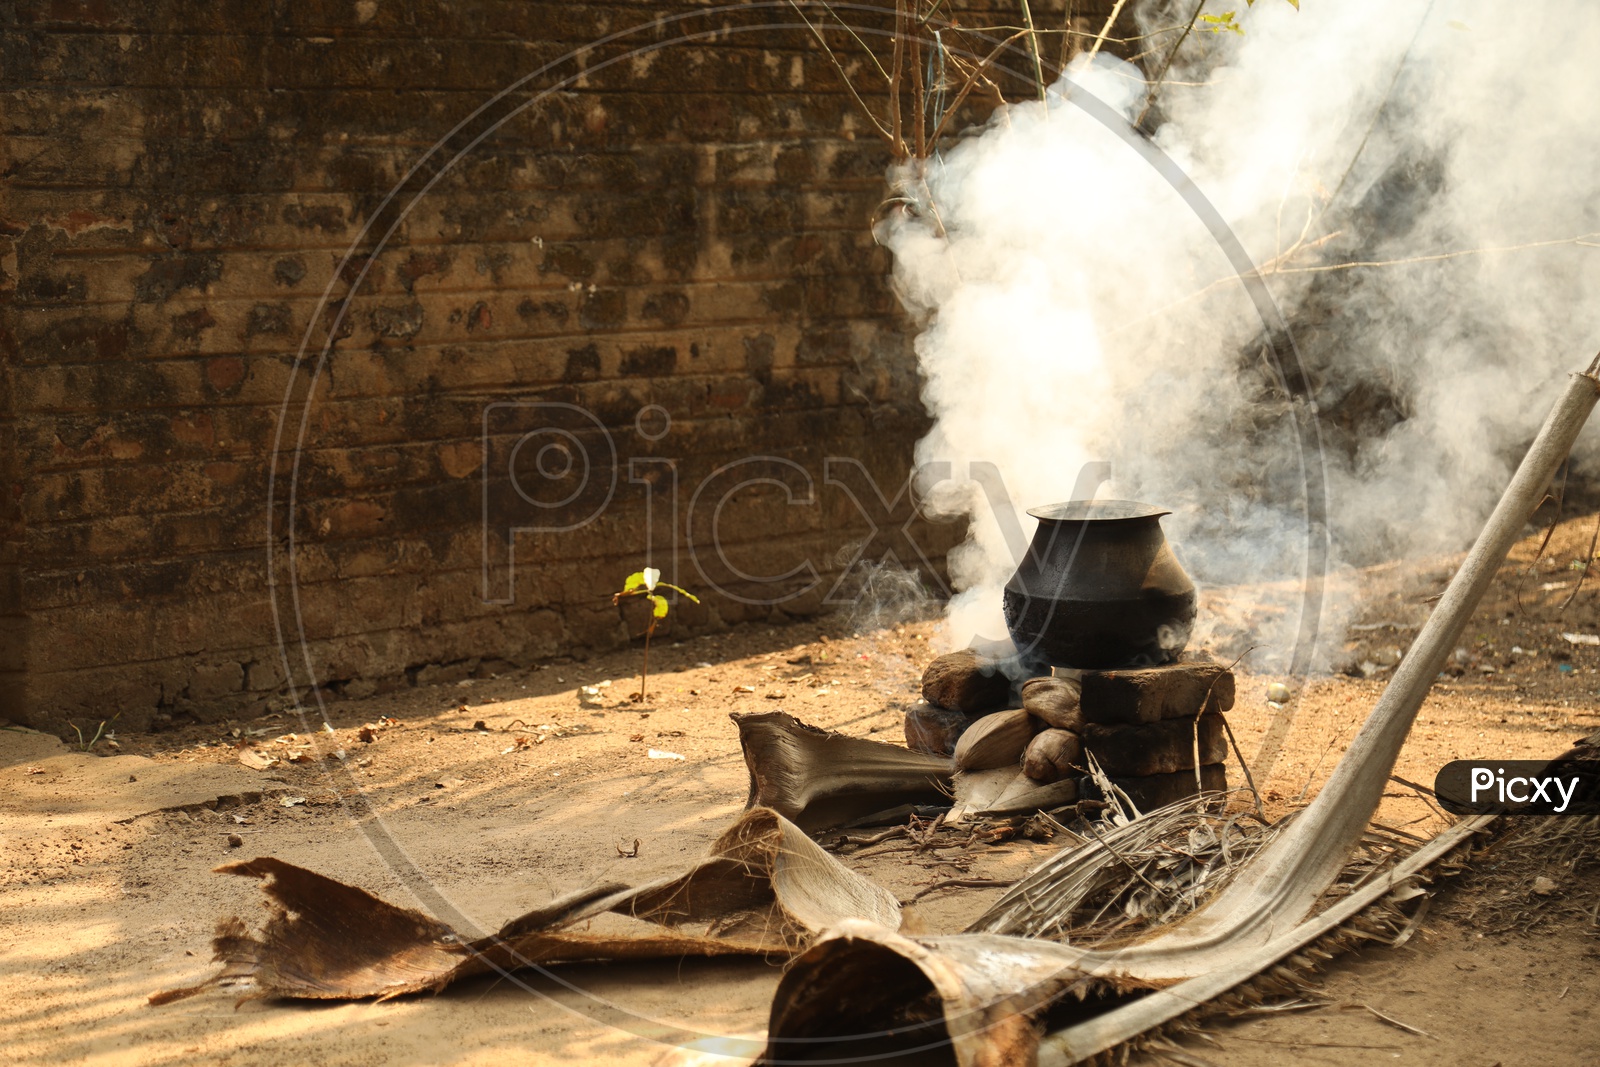 Indian Traditional Stoves in Villages With Thick Smoke Coming out From Stove